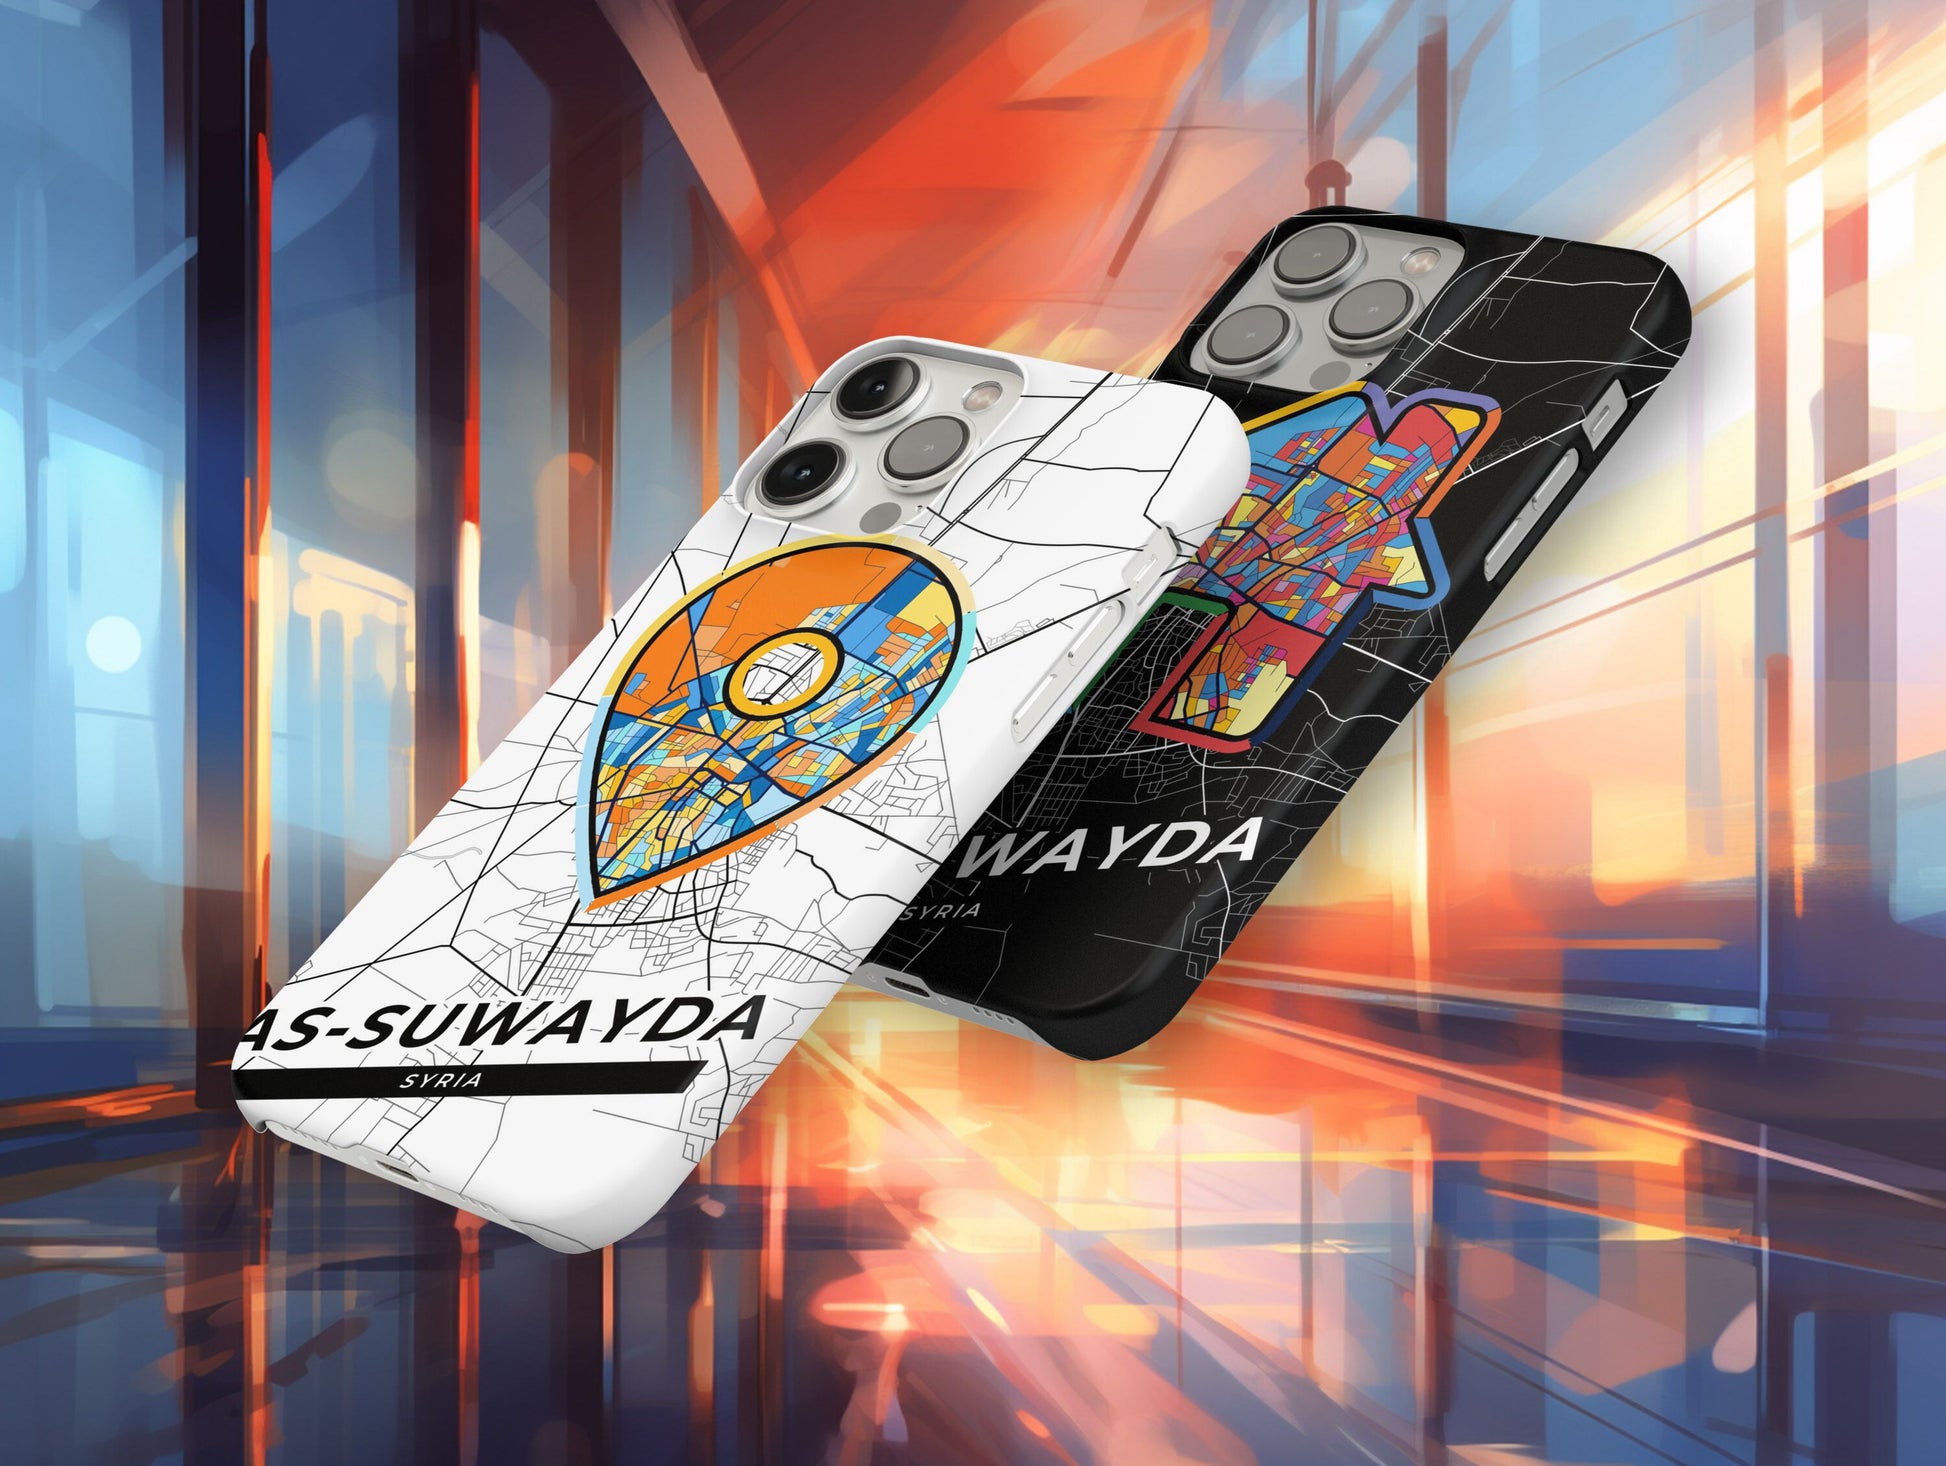 As-Suwayda Syria slim phone case with colorful icon. Birthday, wedding or housewarming gift. Couple match cases.